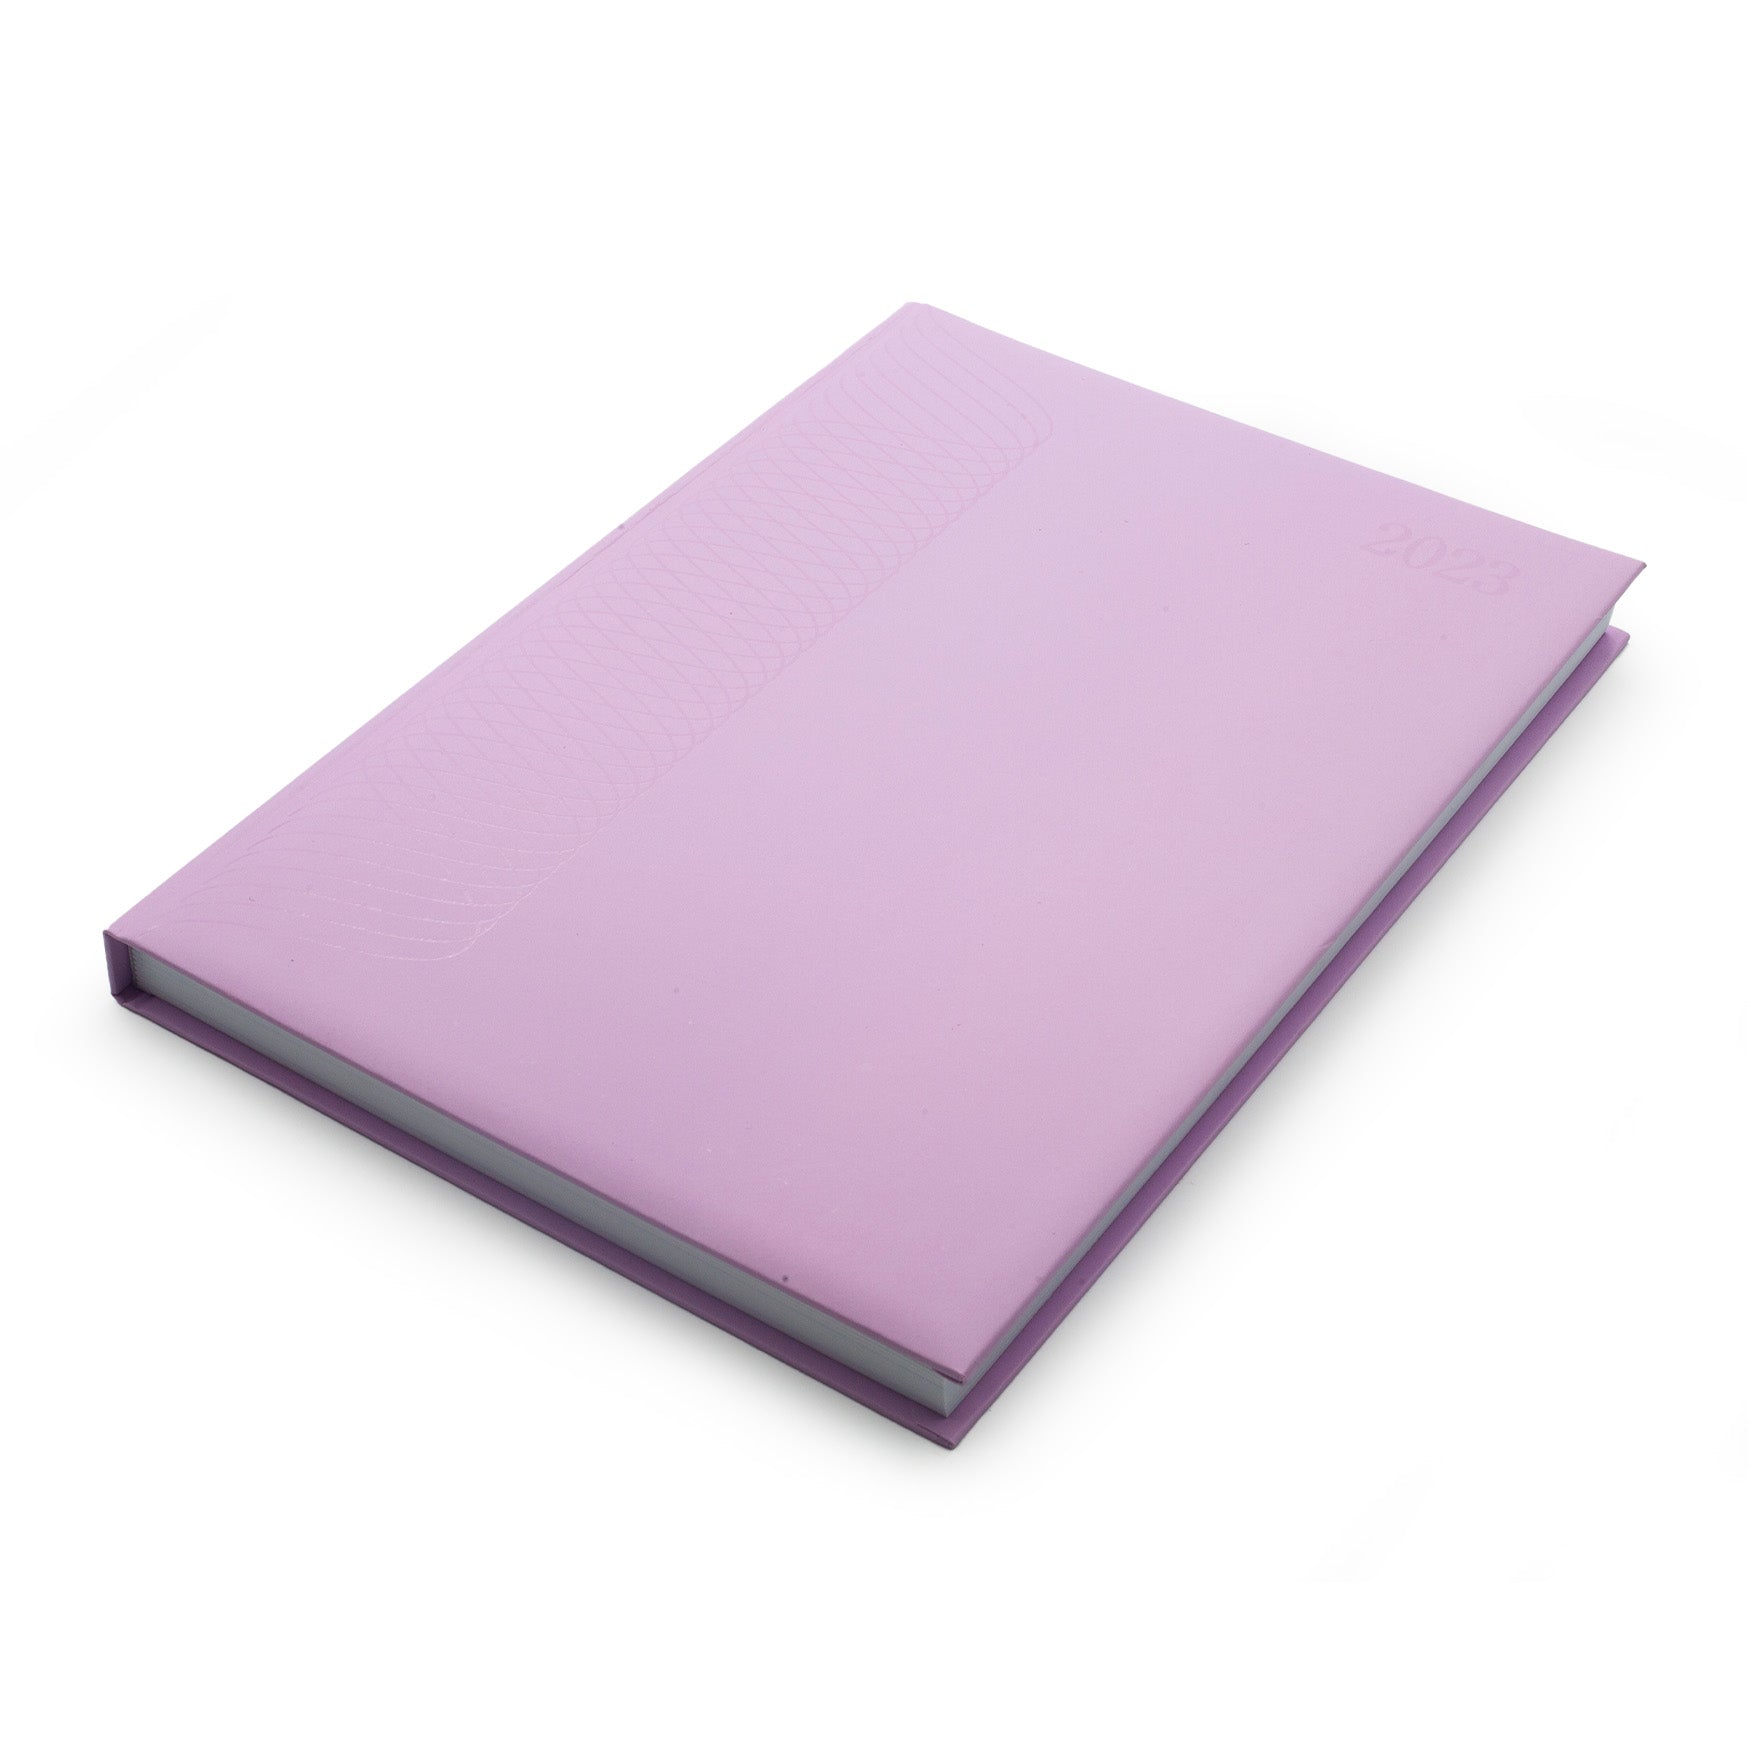 Image shows the top front view of a purple A4 2023 planner